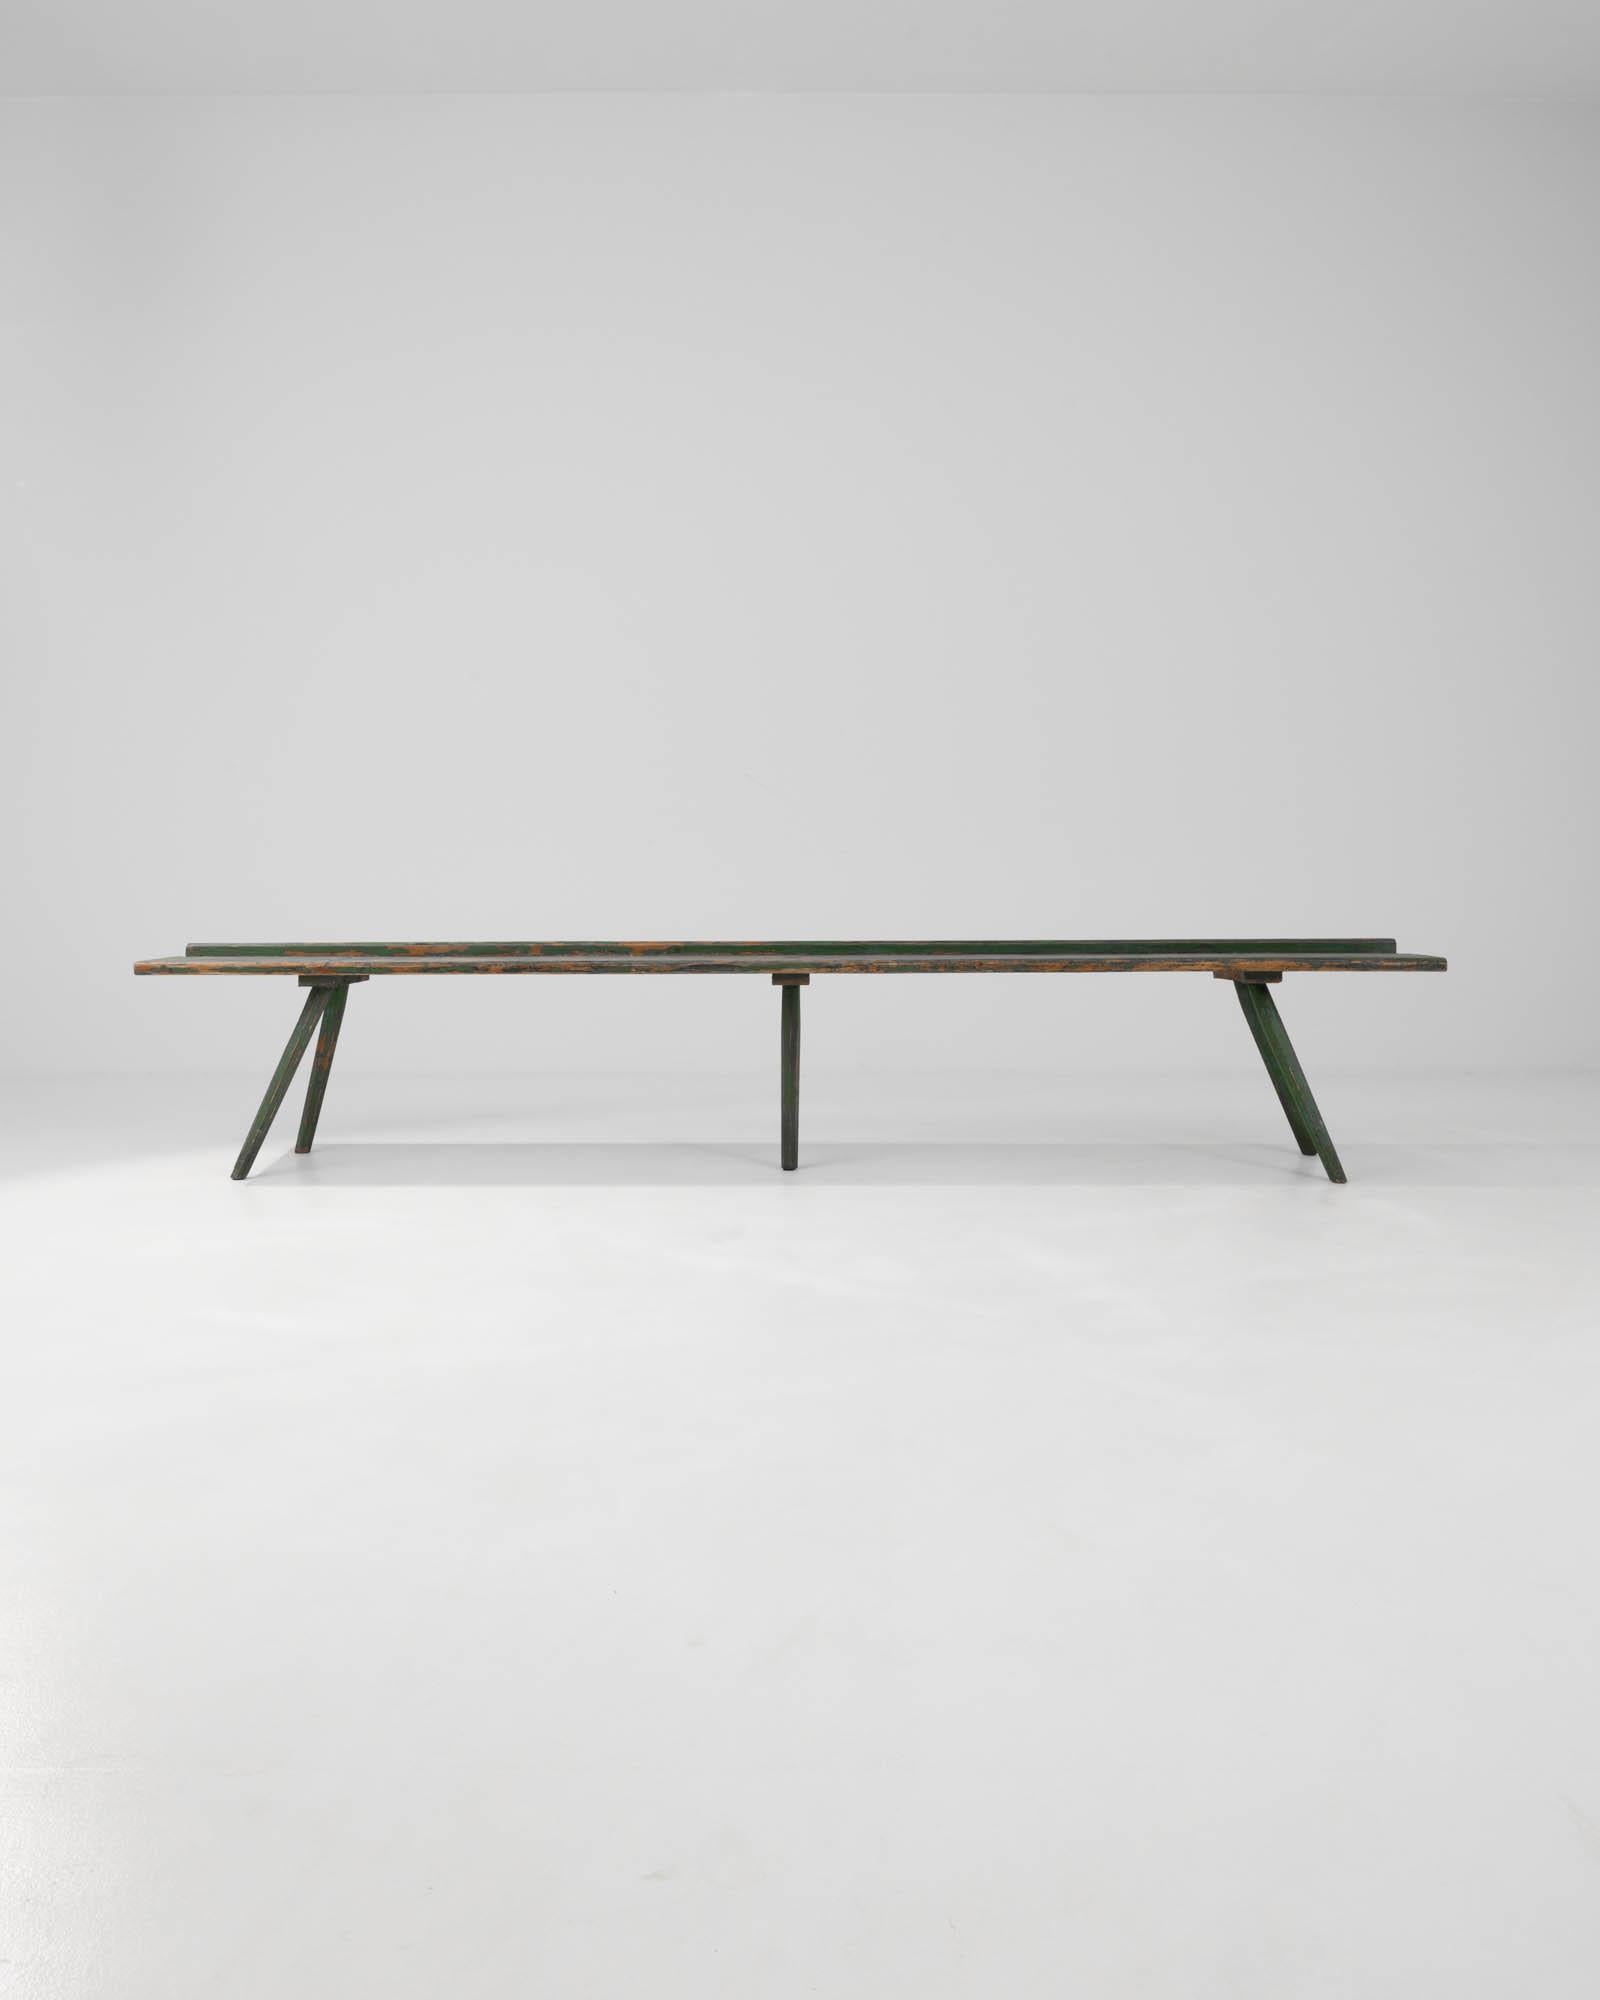 Introducing our enchanting 19th Century Central European Wood Patinated Bench, a captivating relic of bygone eras. This charming piece boasts a unique green patina, weathered gracefully over time, showcasing its rich history and character. Crafted